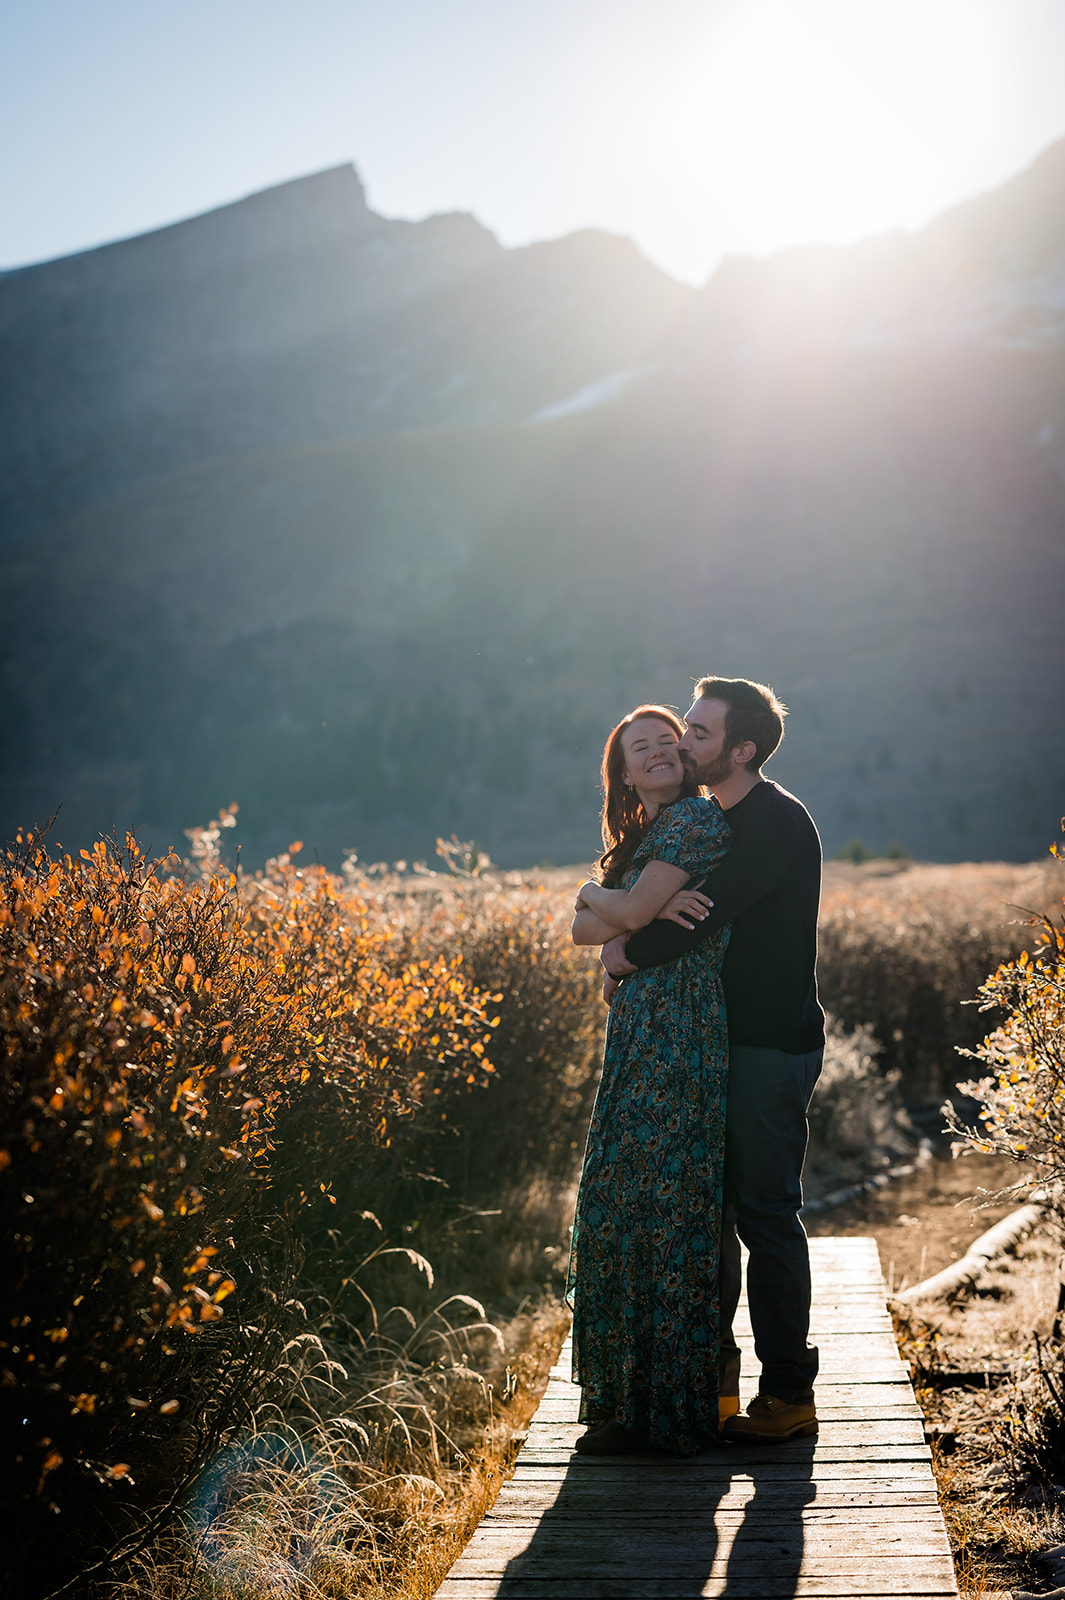 The sun shines over Guanella Pass for the first light of day at this adventure engagement session